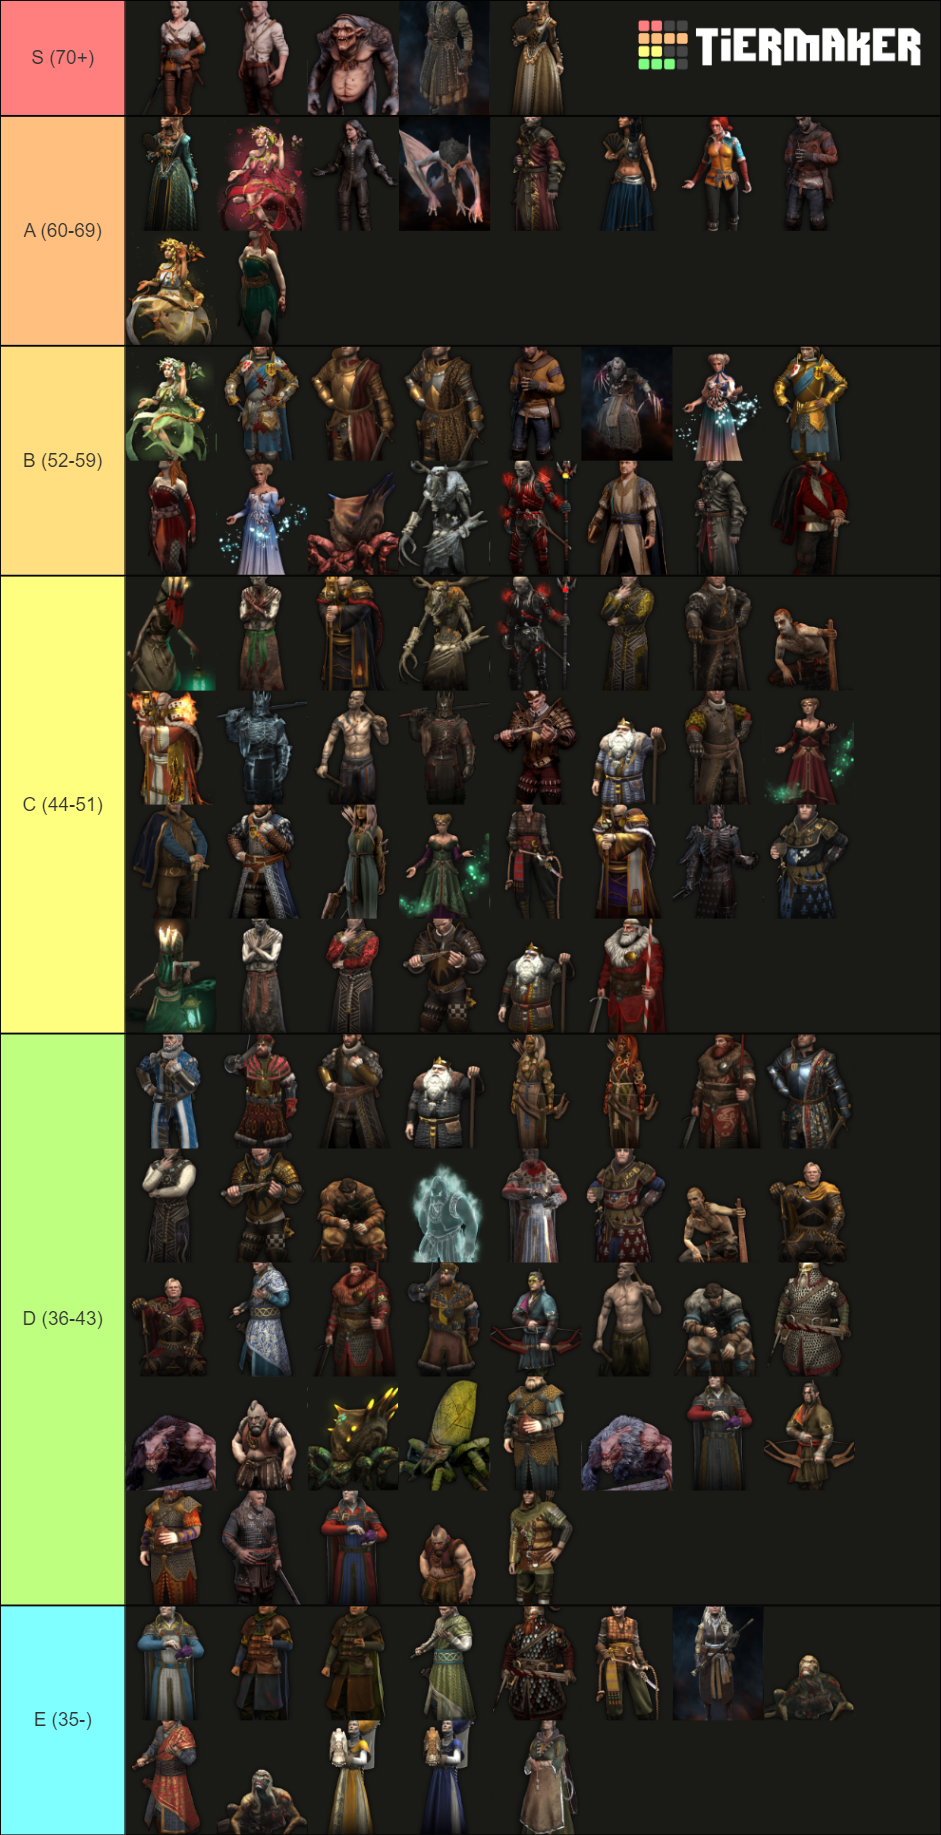 Where can I get good tierlists for skins that are actually good